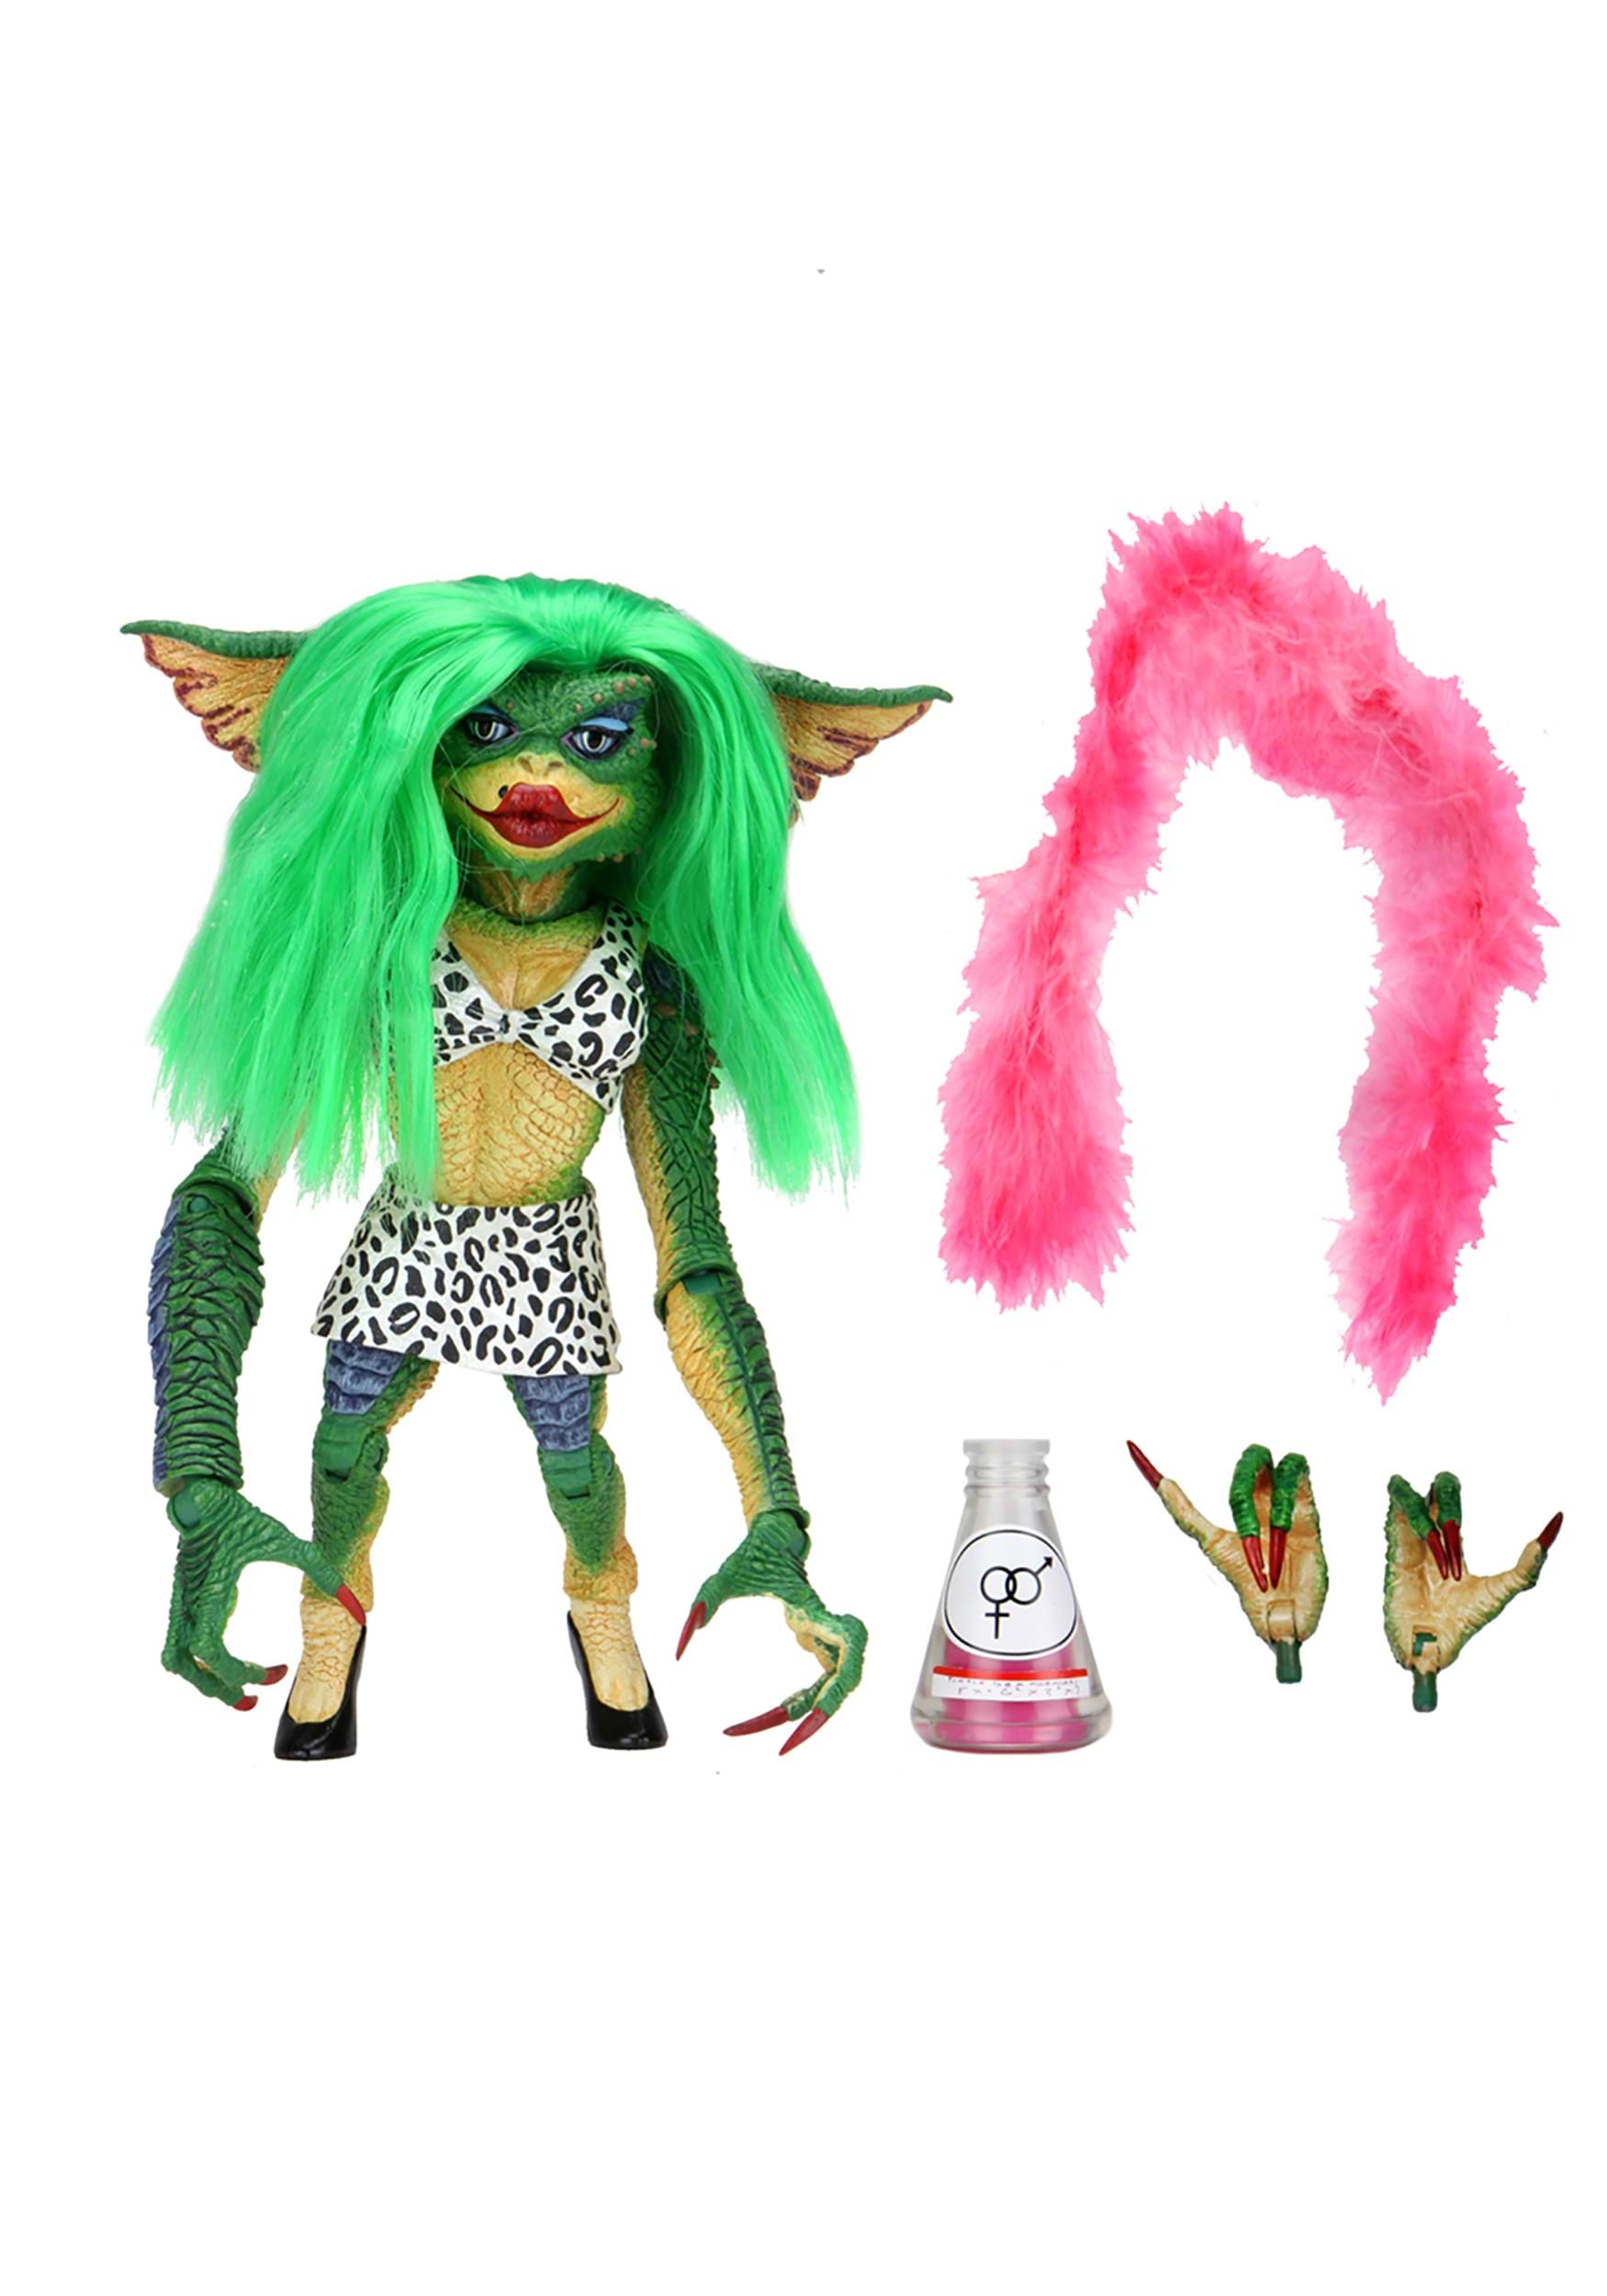 Gremlins 2: The New Batch Greta - 7" Scale Action Figure